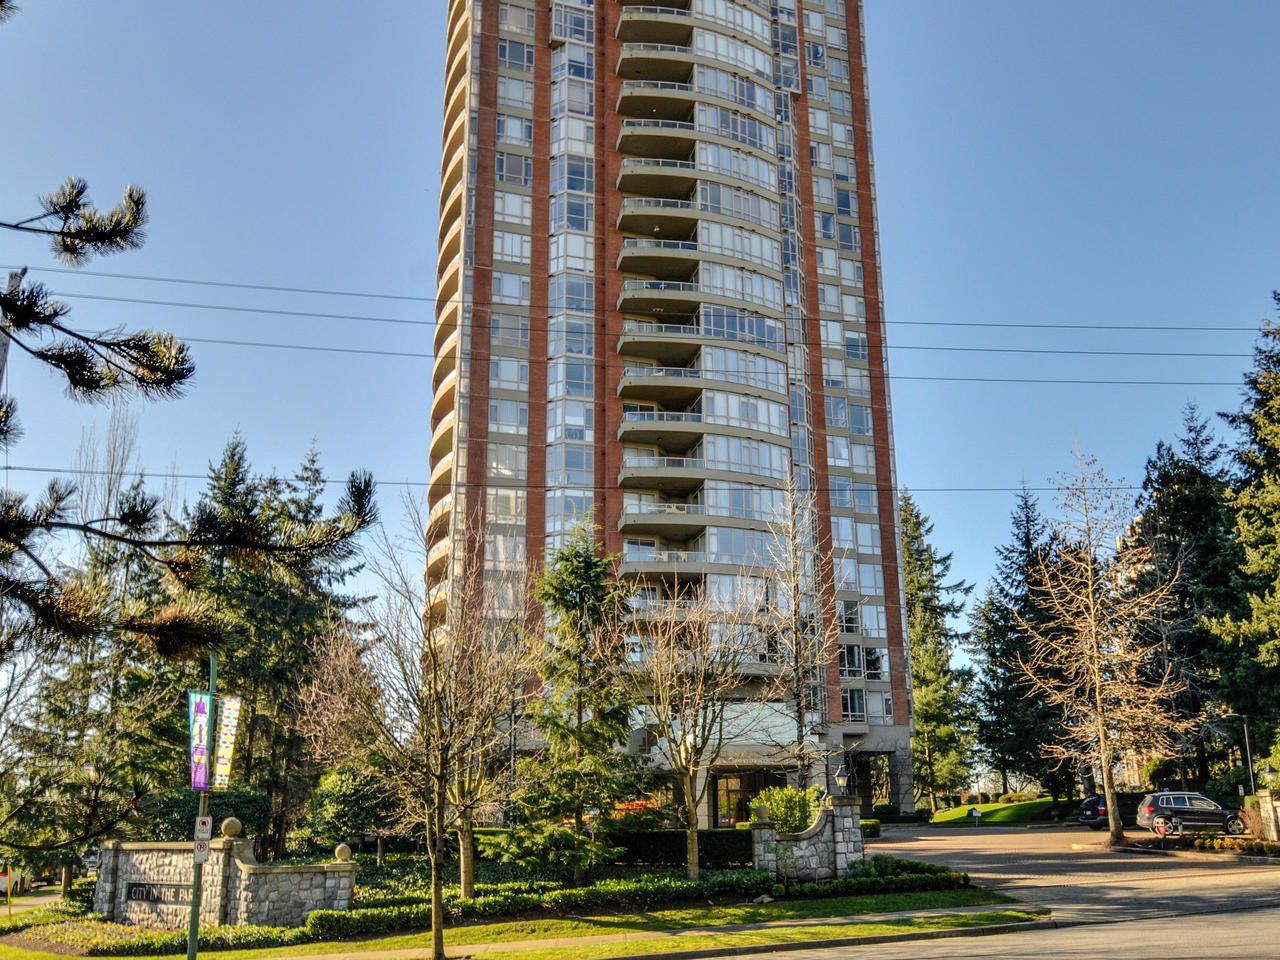 Main Photo: 903 6888 STATION HILL DRIVE in Burnaby: South Slope Condo for sale (Burnaby South)  : MLS®# R2336364